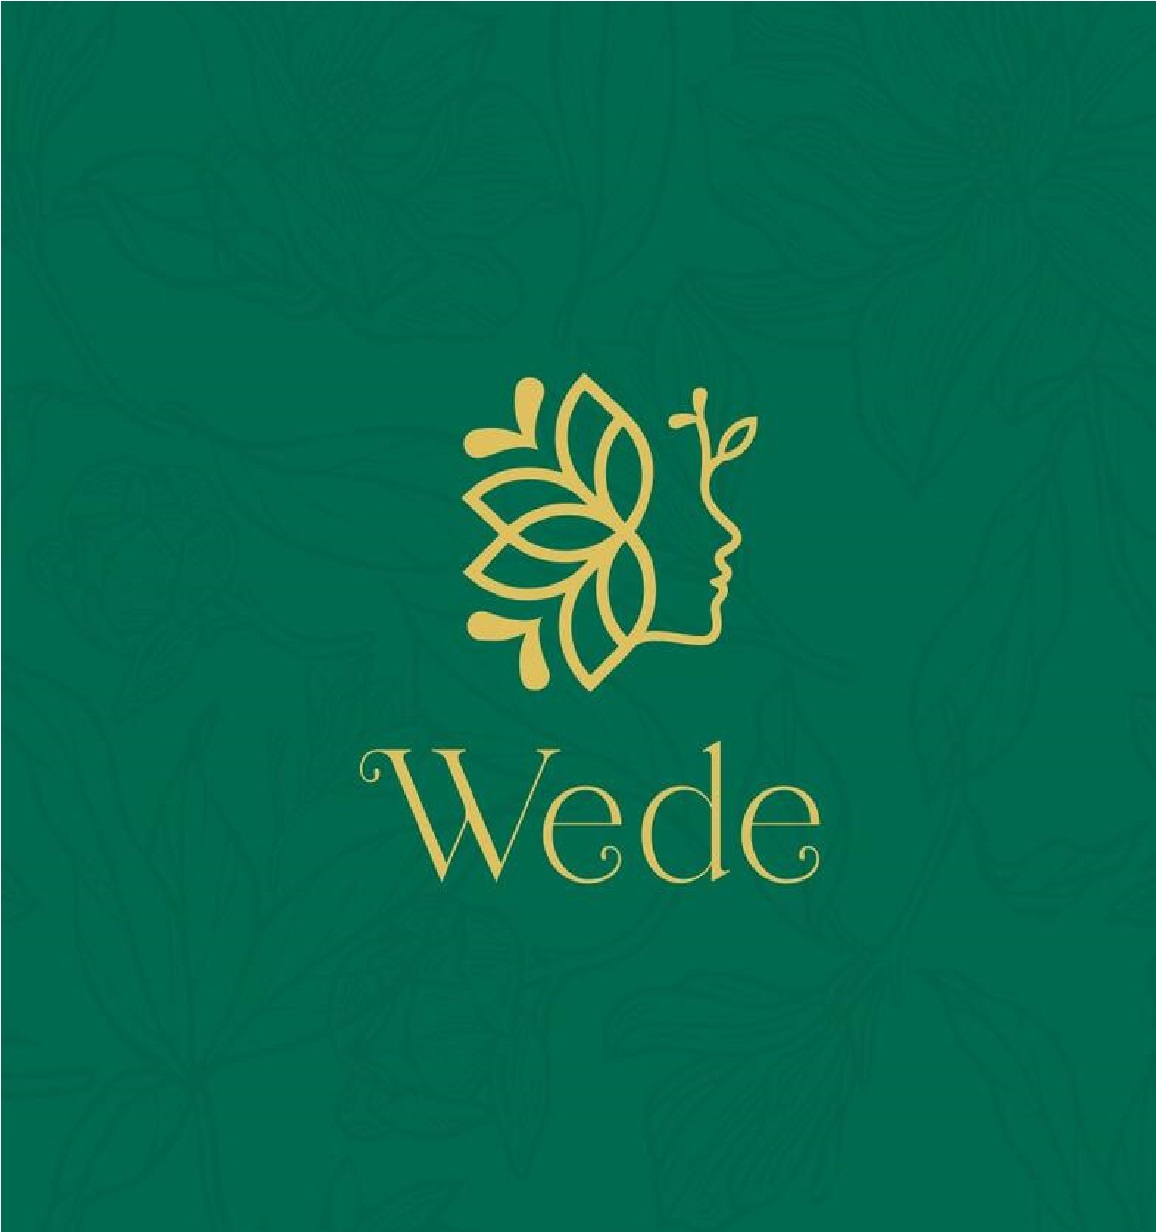 Wede cosmeceuticals Company